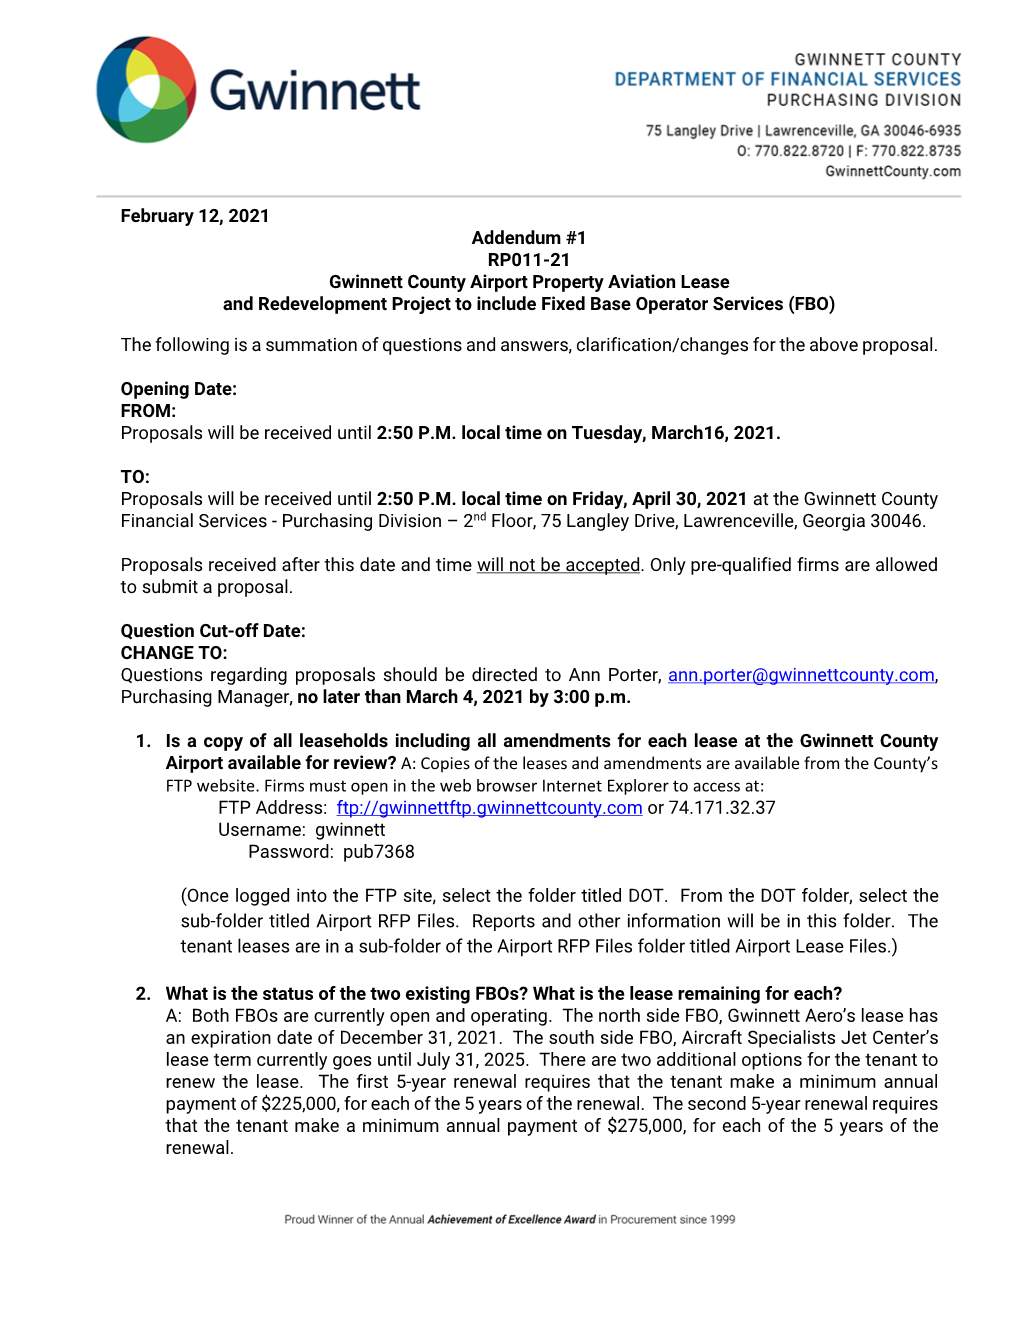 February 12, 2021 Addendum #1 RP011-21 Gwinnett County Airport Property Aviation Lease and Redevelopment Project to Include Fixed Base Operator Services (FBO)